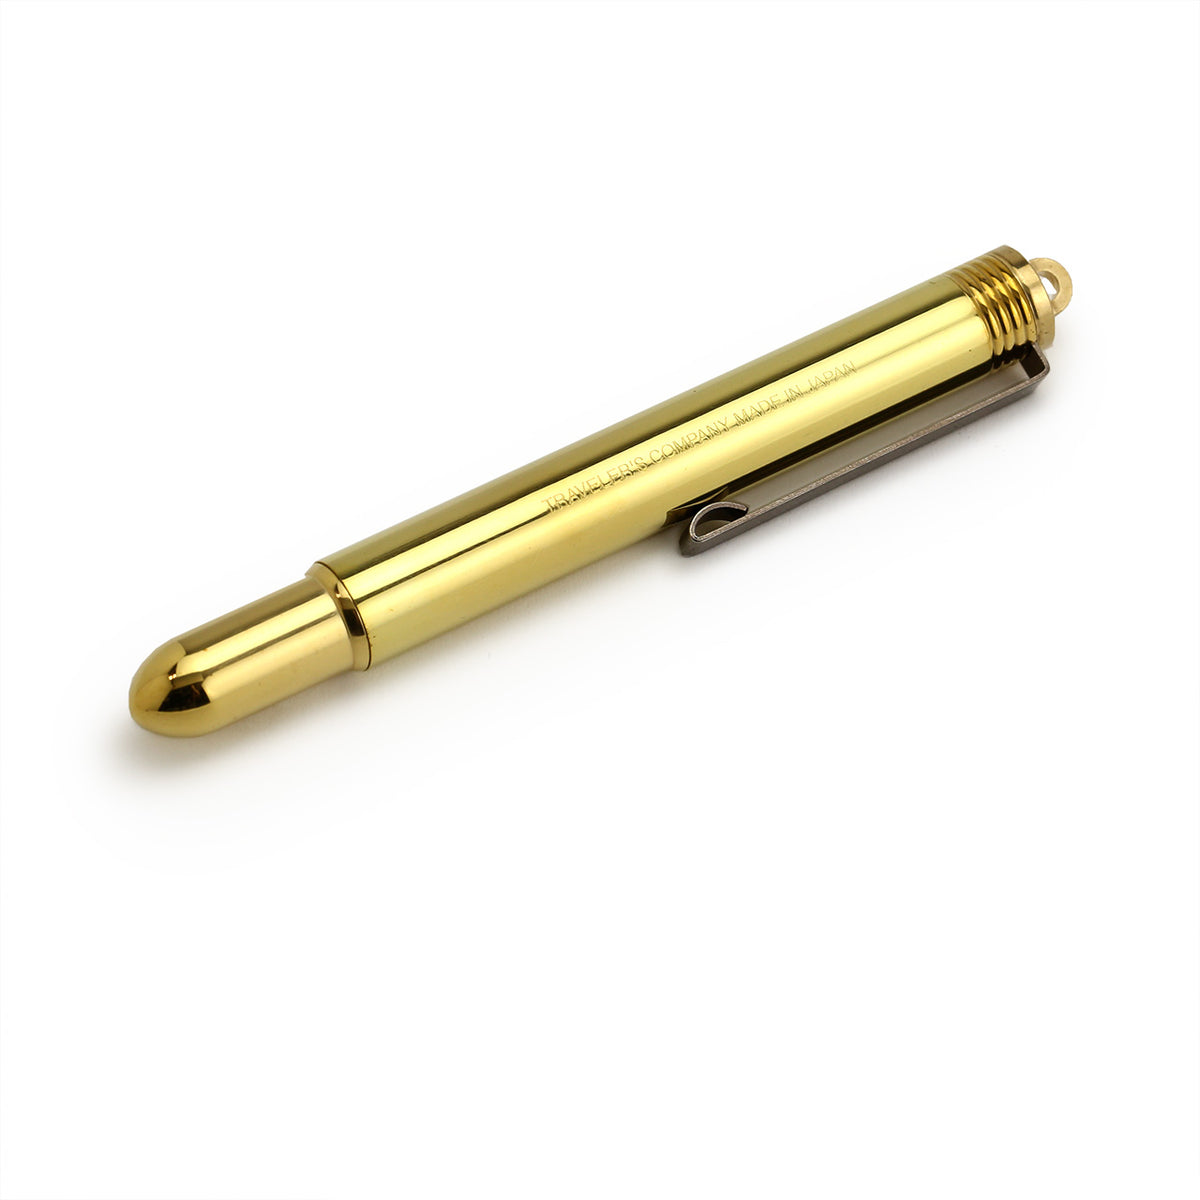 compactly closed brass fountain pen showing the rounded end, hanging loop and rustic clip